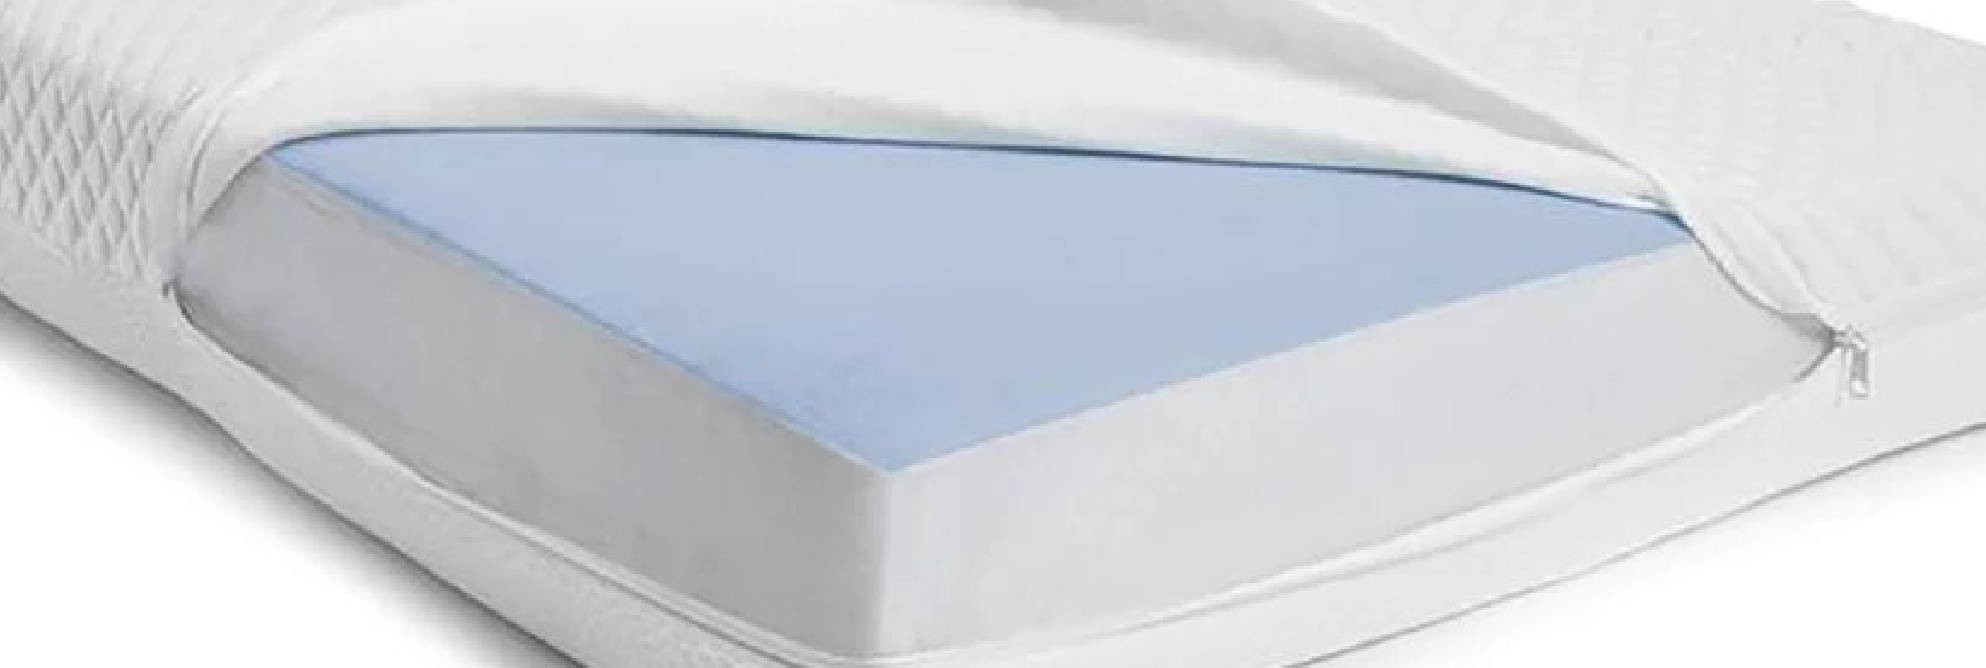 Yeti mattress corner showing the blue Breahtable Chill Cooling layer underneath the cover.